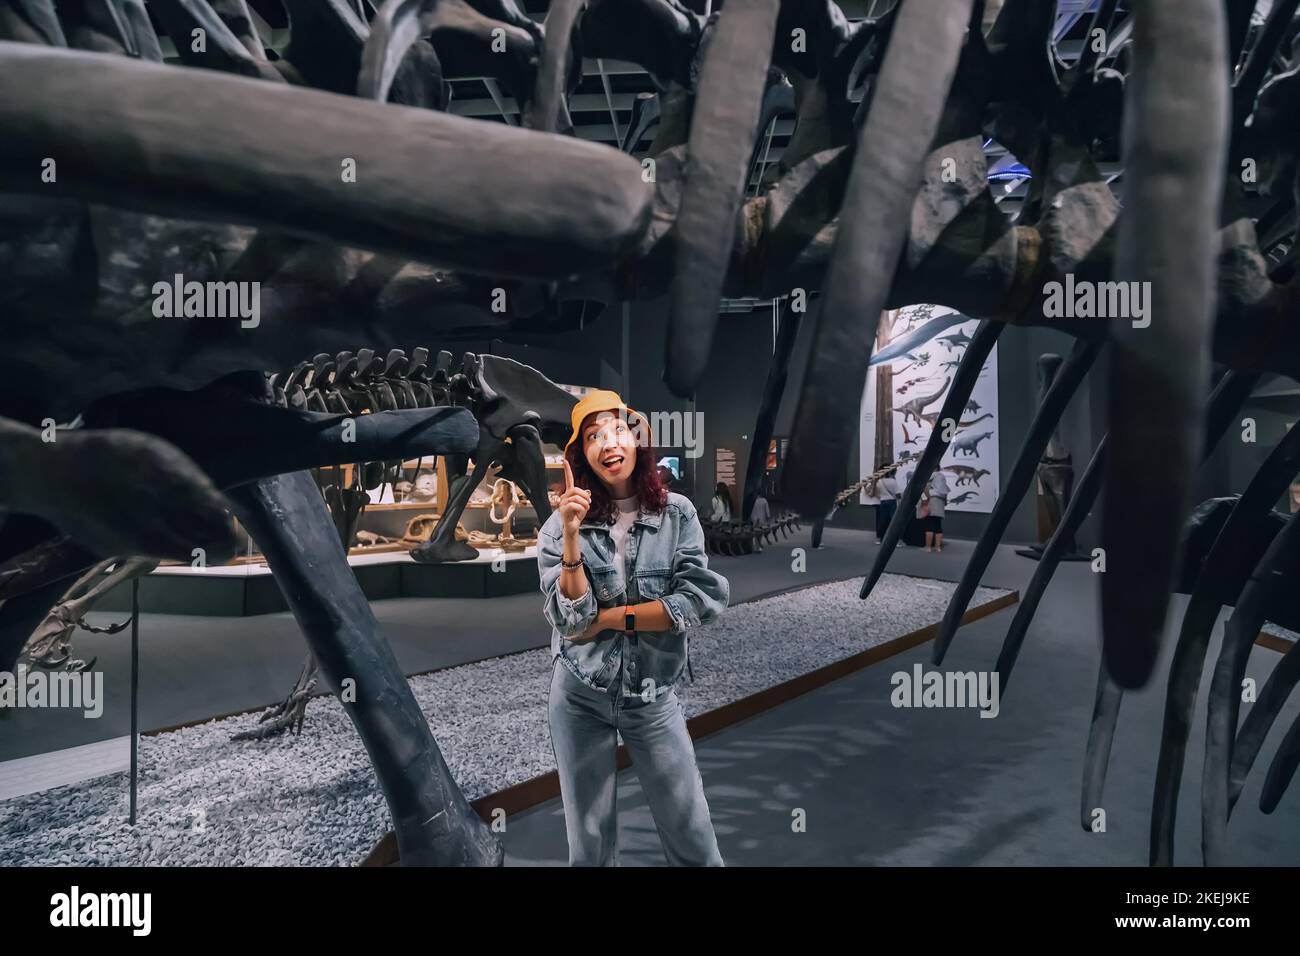 26 July 2022, Munster, Germany: Excited tourist girl or a paleontologist student looks with interest at the fossilized remains of a dinosaur skeleton Stock Photo